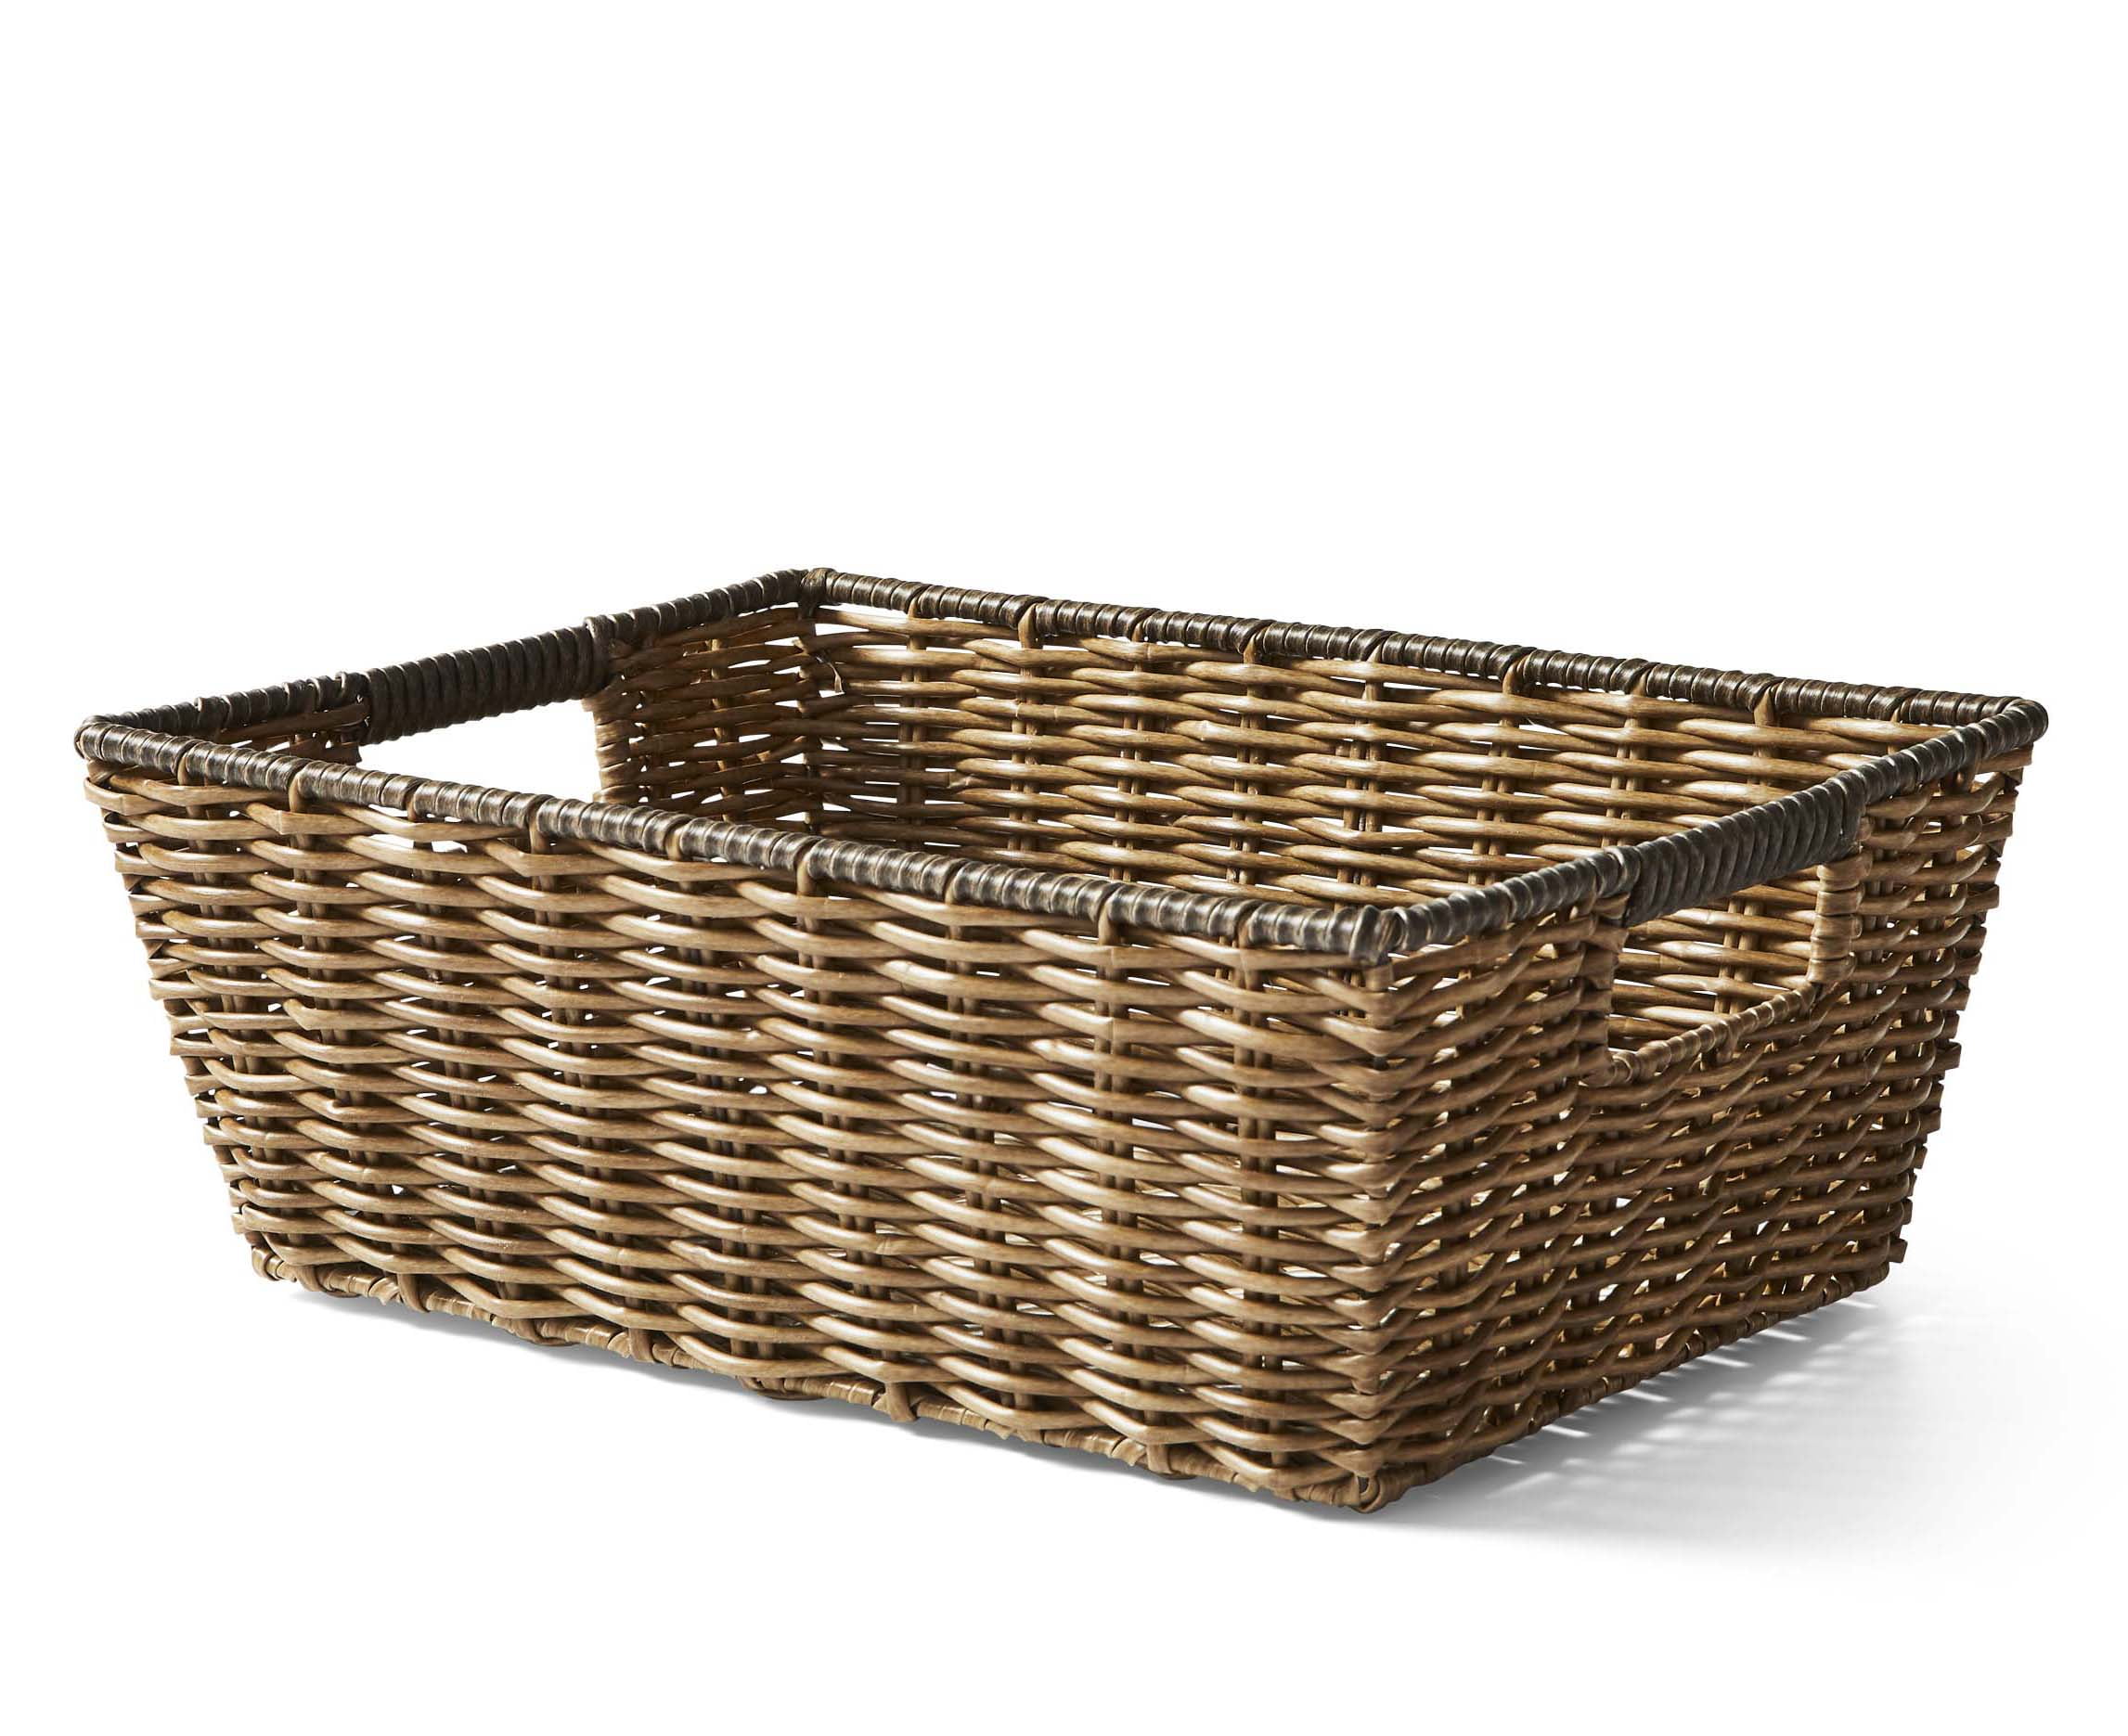 The Better Homes & Gardens Poly Rattan Storage Basket with Cut-Out Handles